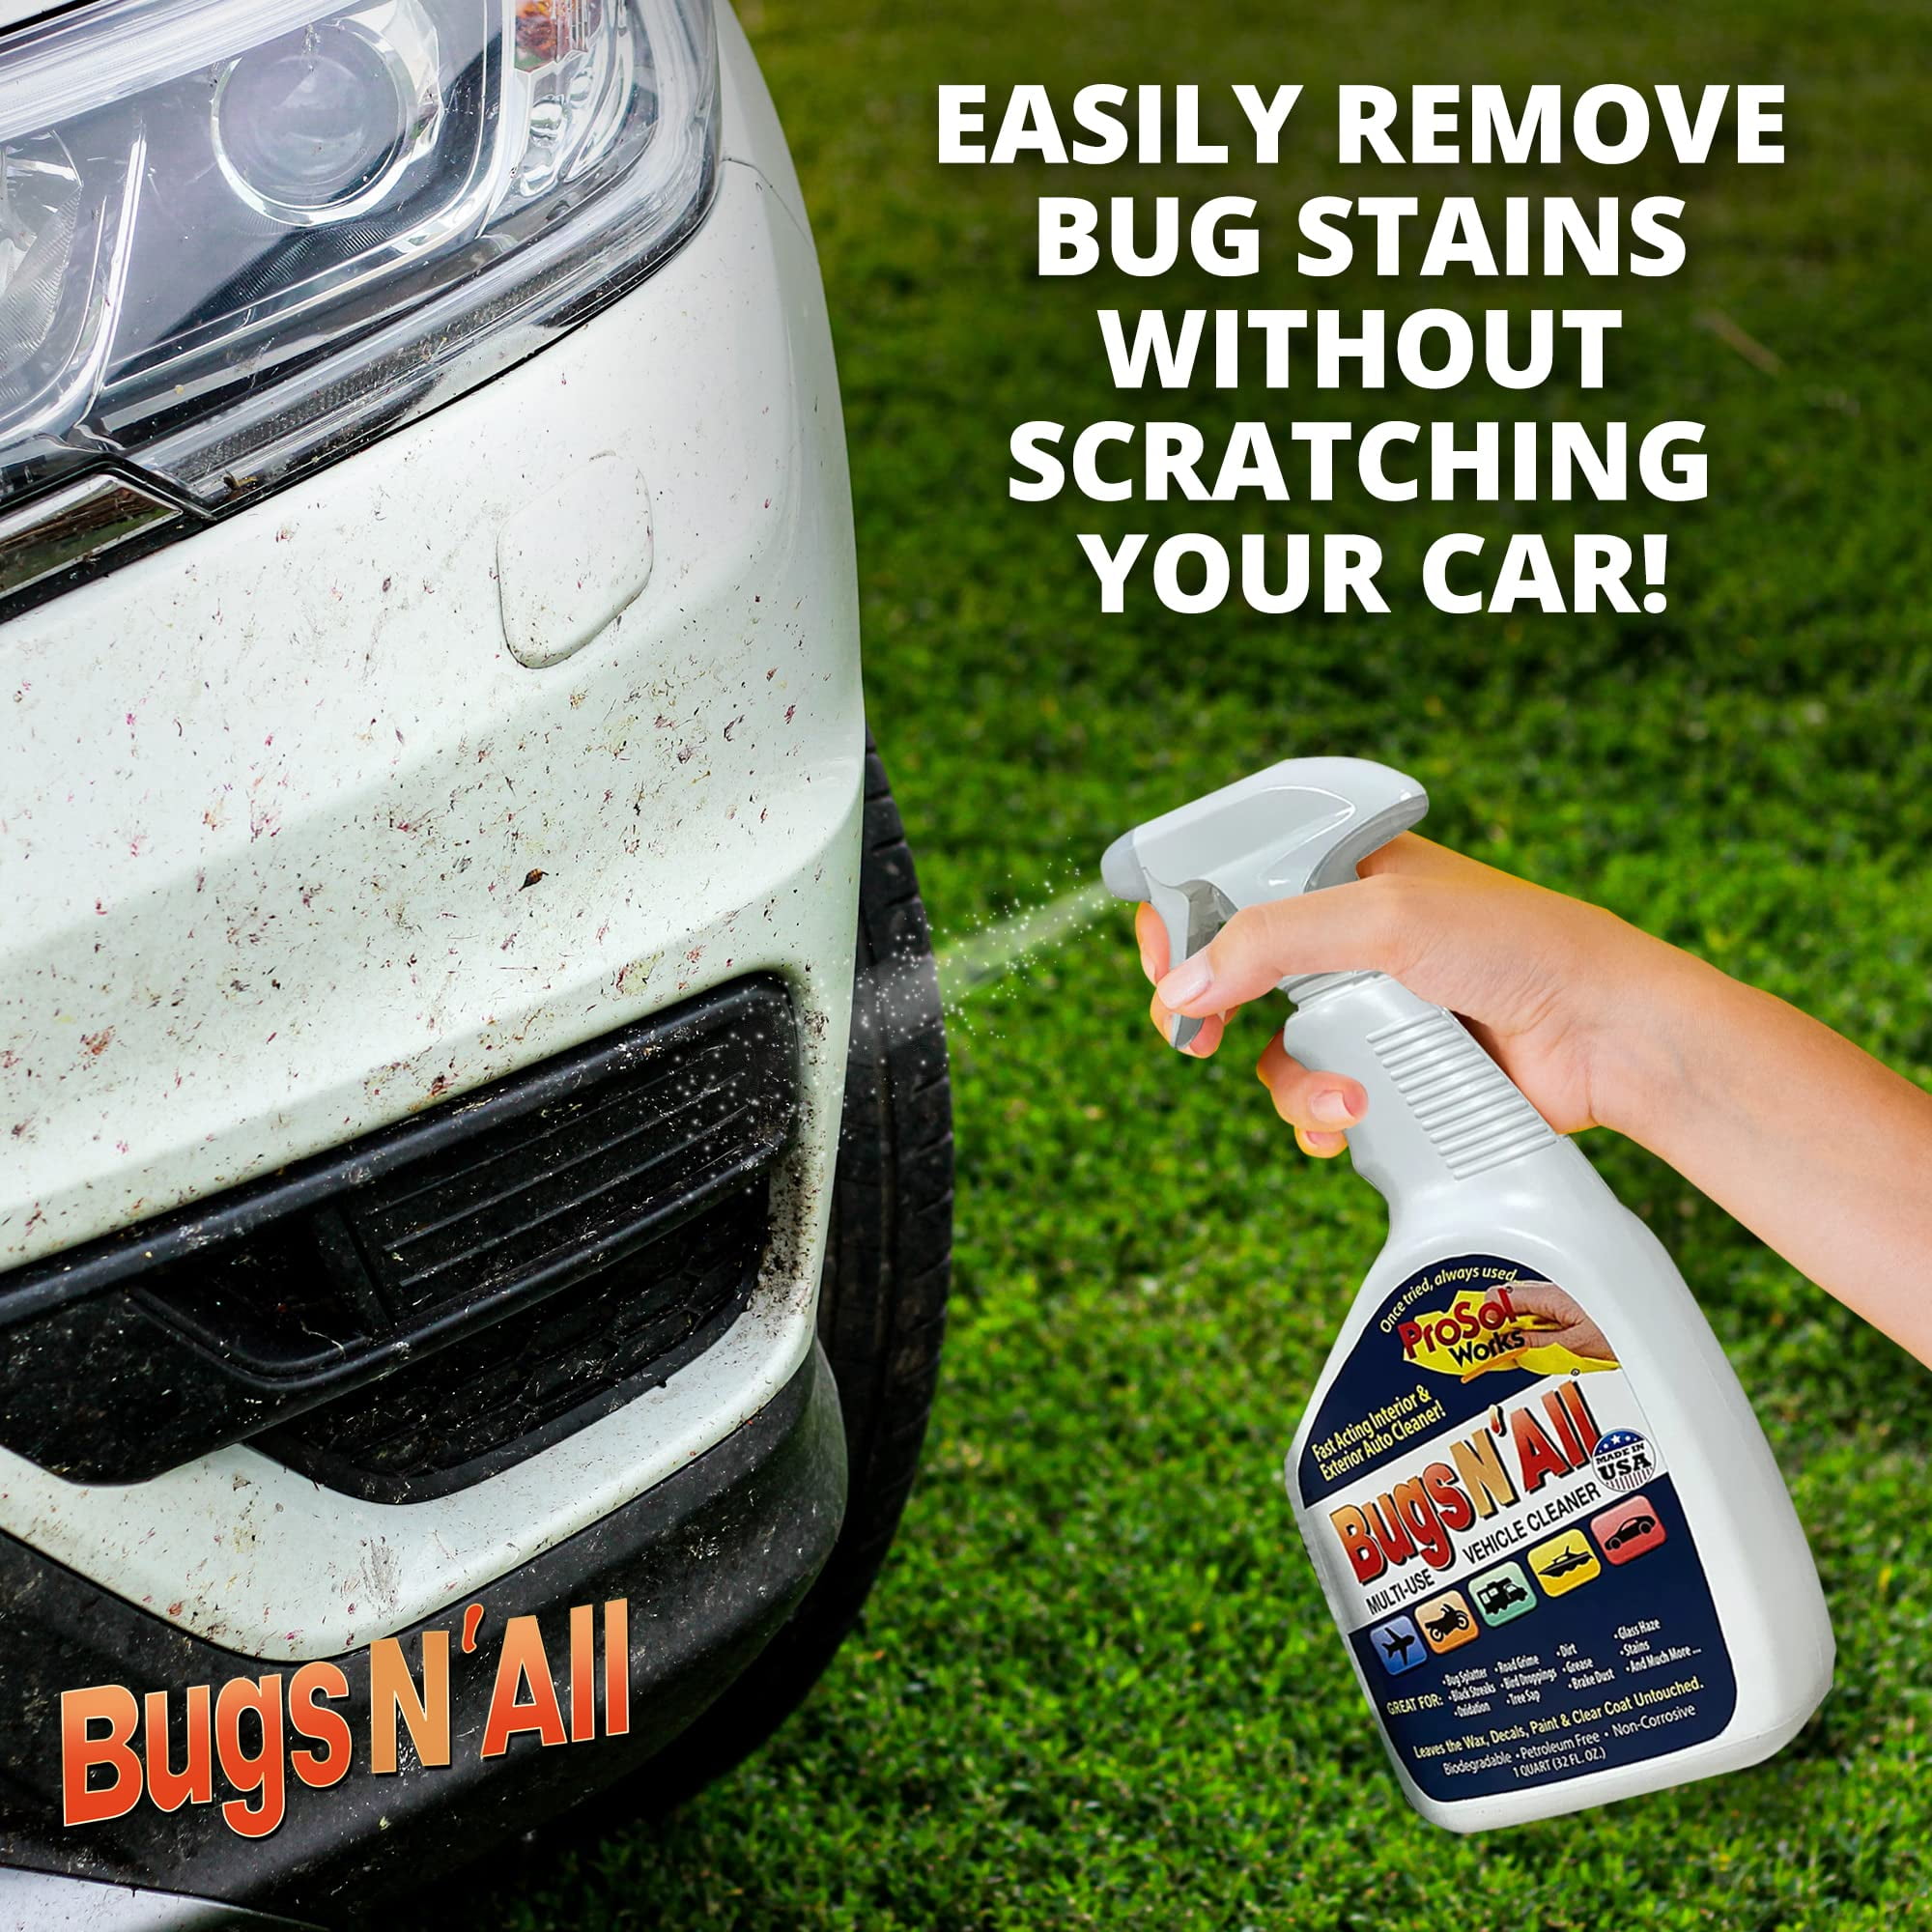  PROSOL WORKS Bugs N' All Bug Splatter Remover for Cars & Other  Vehicles - 1 Gallon Concentrated Multipurpose Cleaner & Degreaser W/Free 32  Oz Spray Bottle - Multi Surface Cleaner for